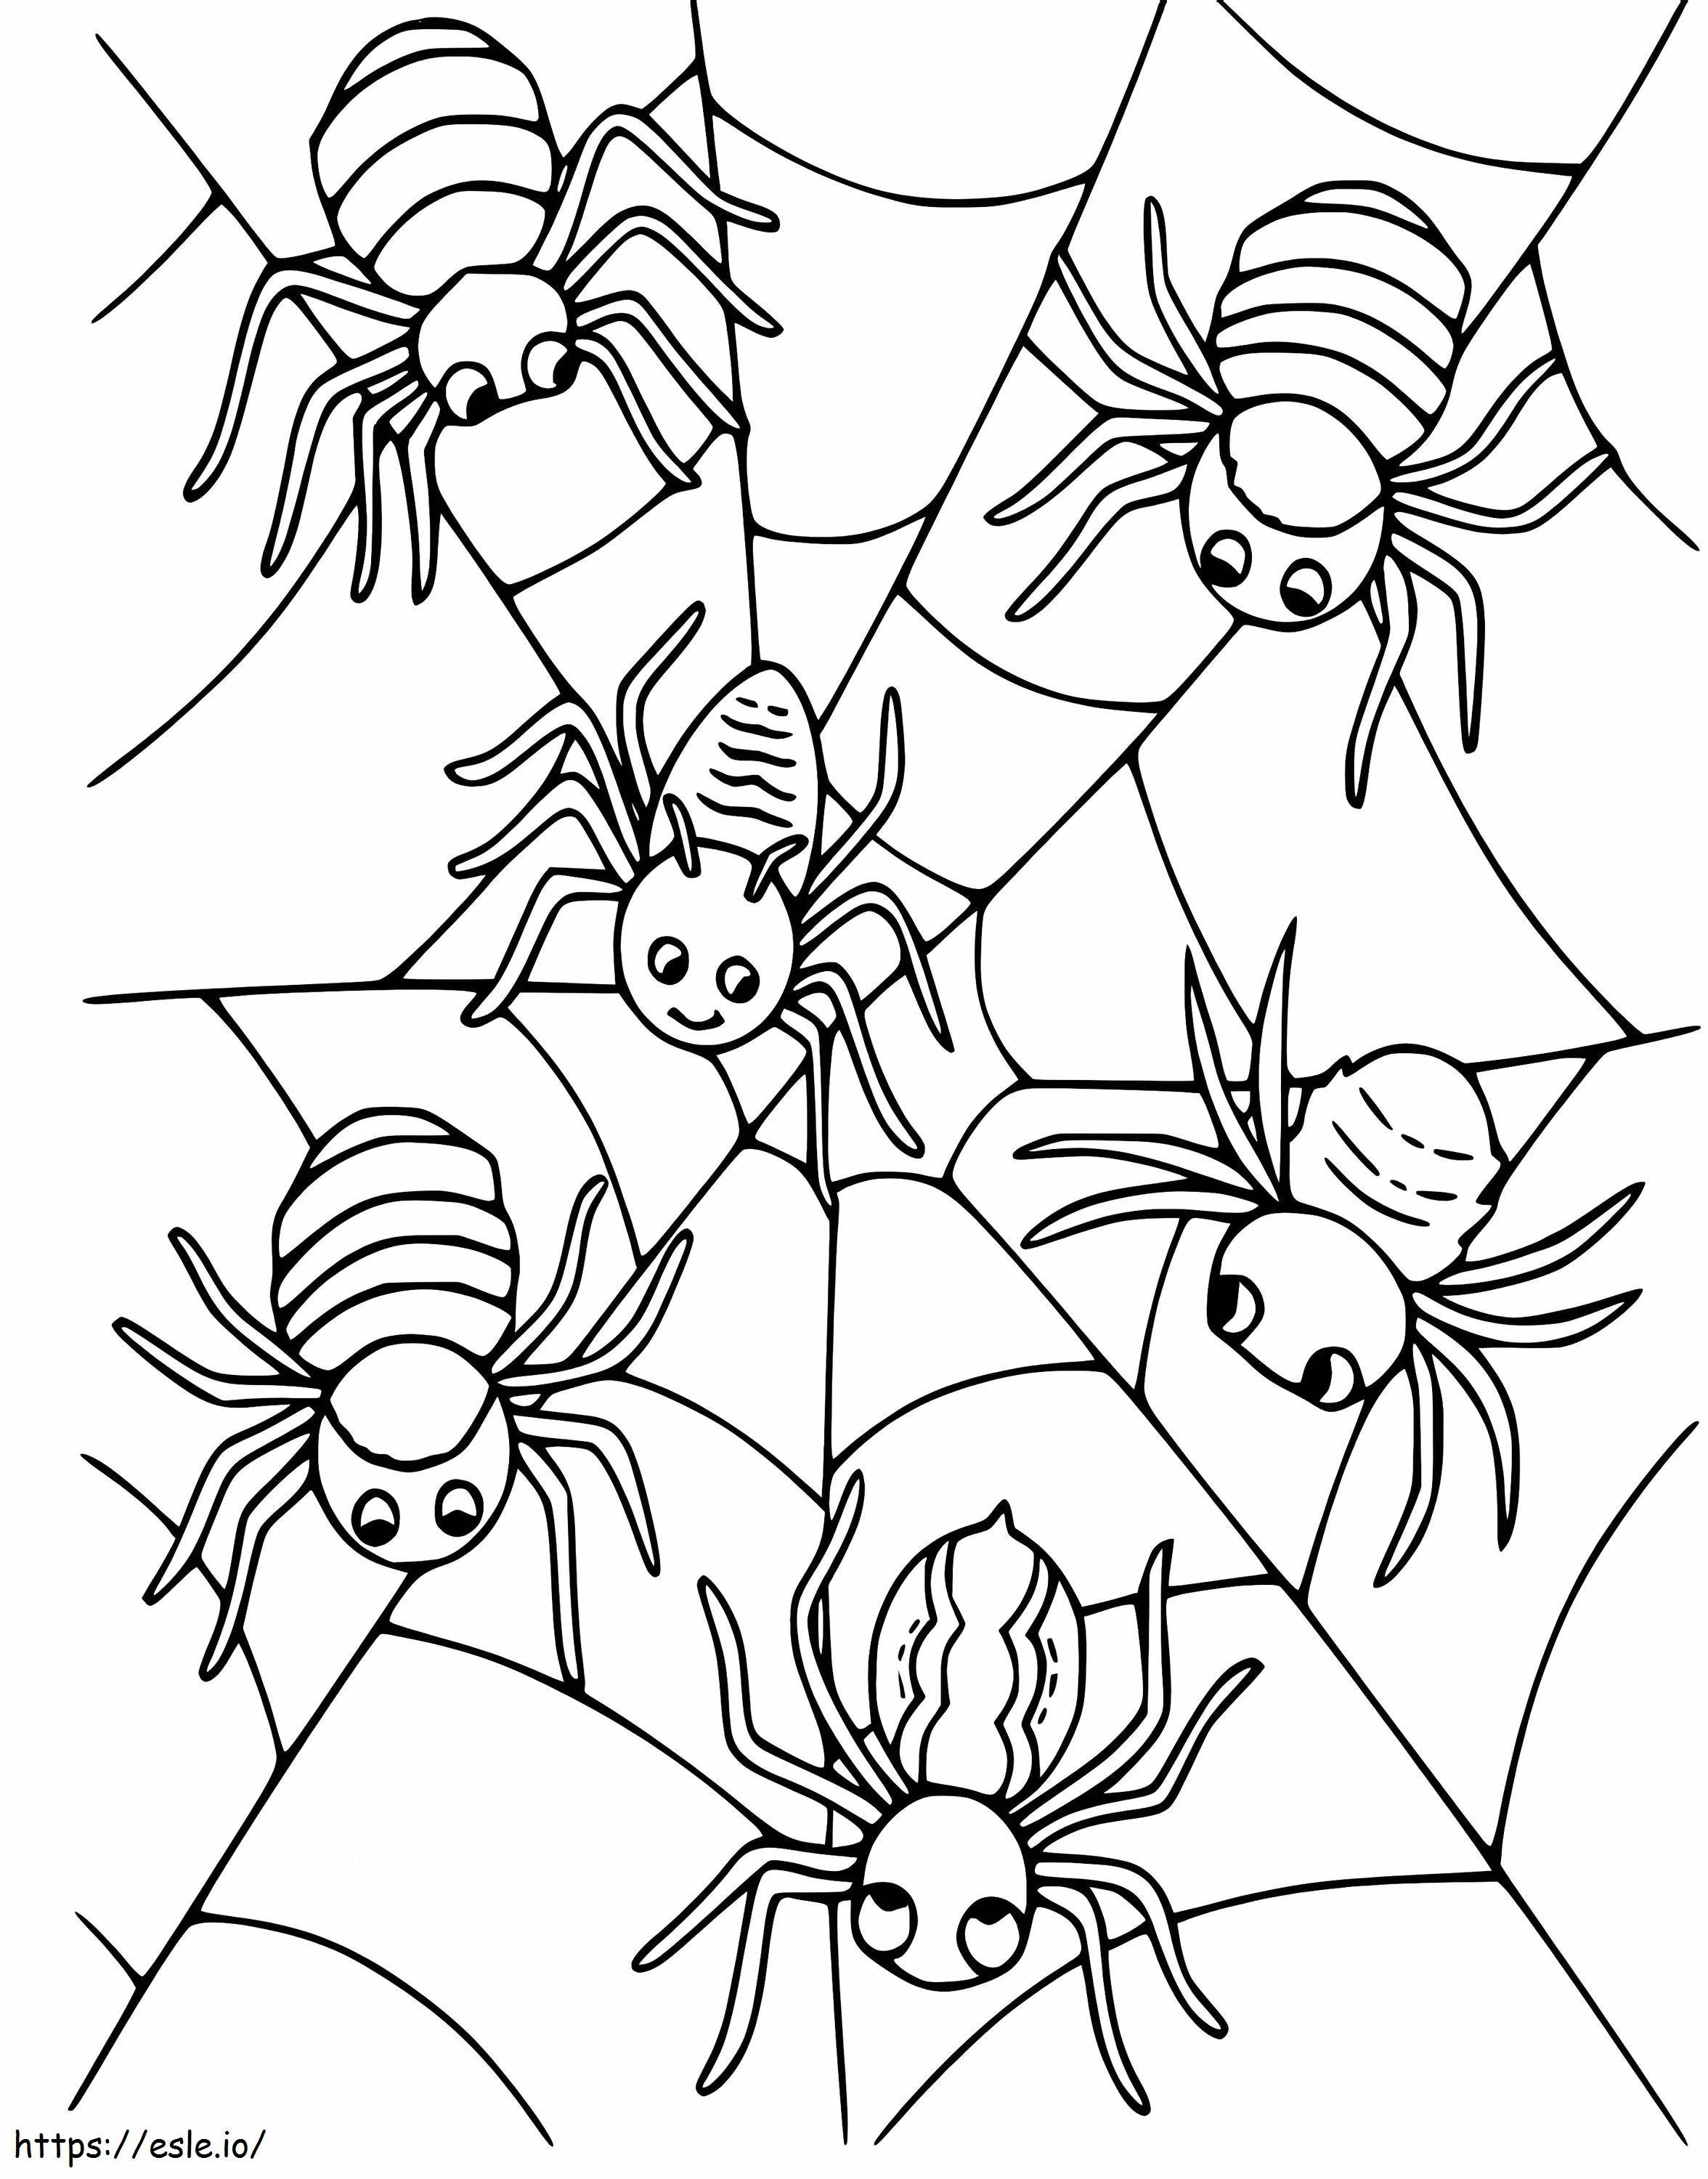 Spiders On Spider Web coloring page